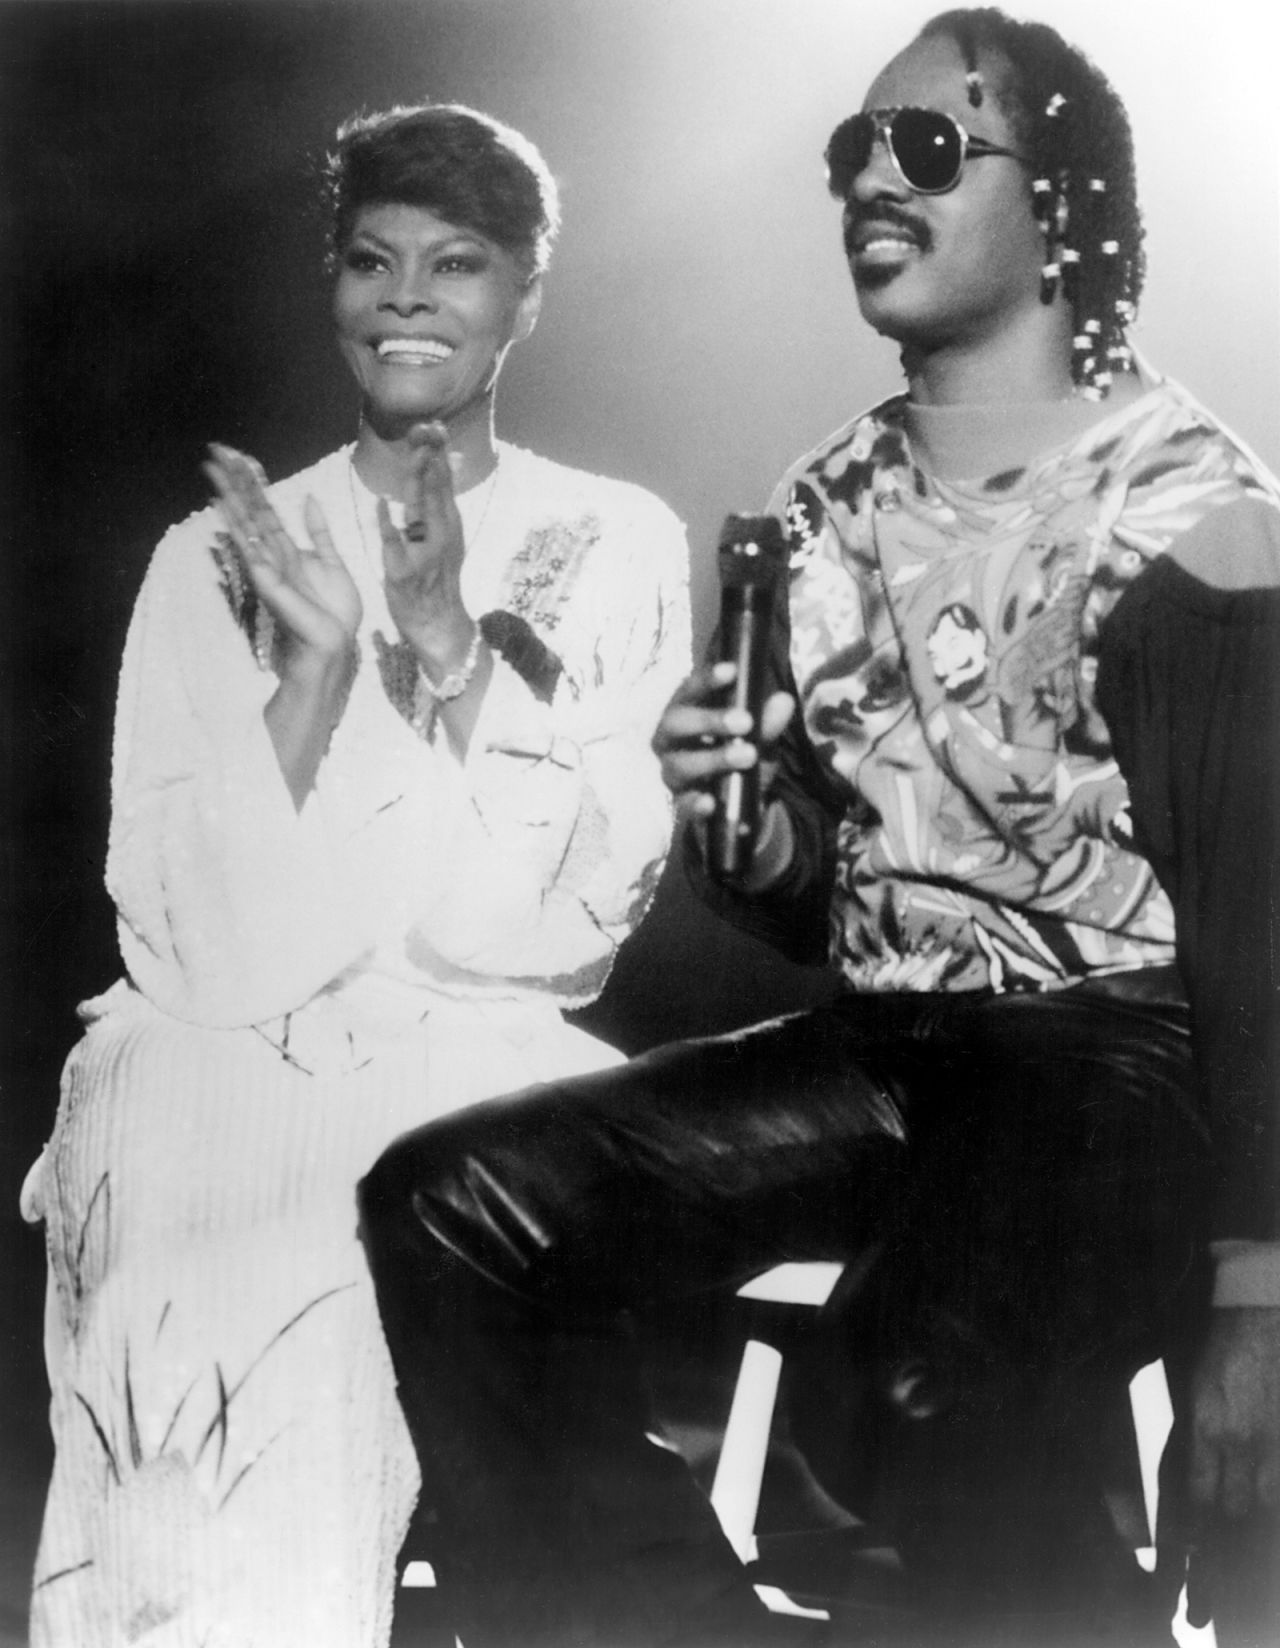 Warwick and Wonder perform on the TV show "Solid Gold" in 1985. "Solid Gold" originally premiered as a TV special in 1979 and was later adapted into a regular series. Warwick hosted the premiere and stayed on as host for several years.